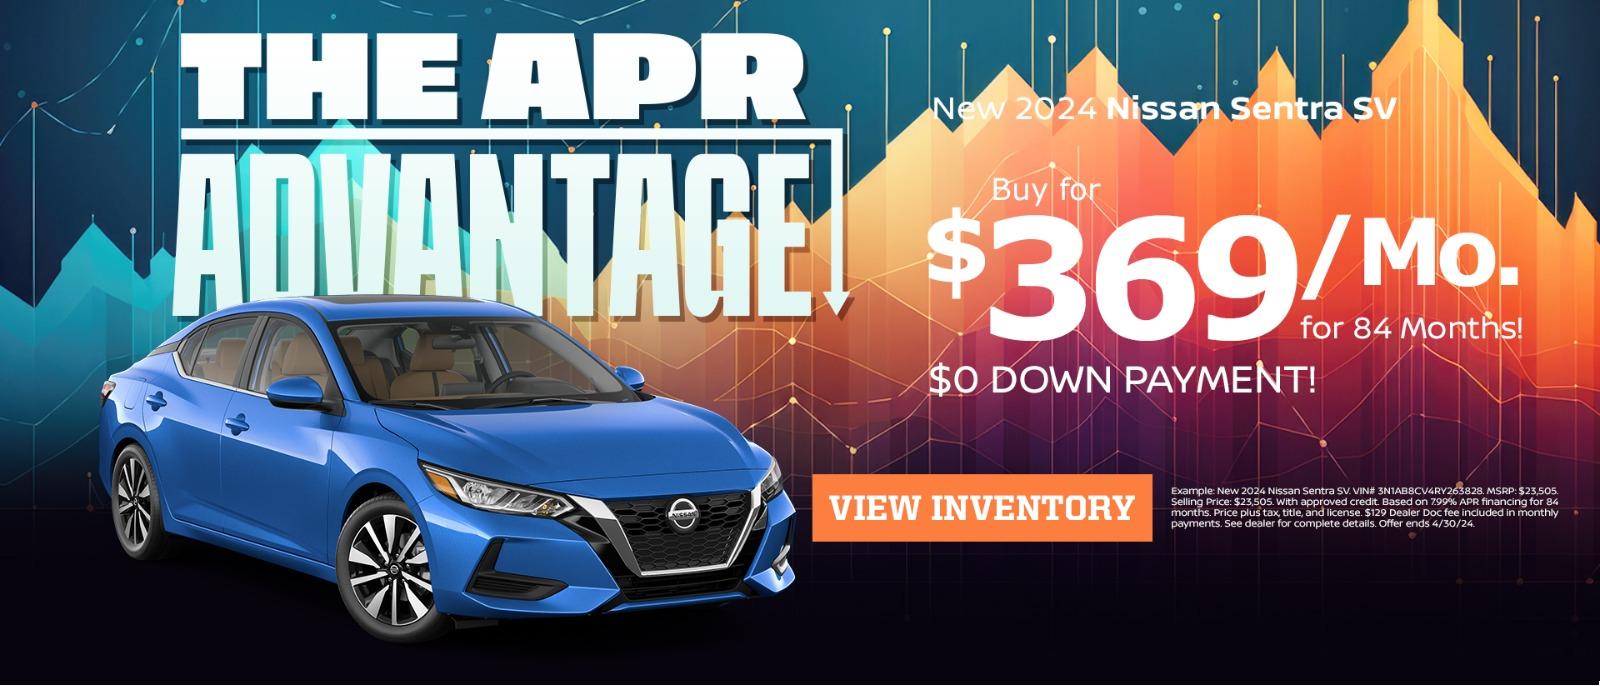 New 2024 Nissan Santra SV
Buy for $369/mo for 84 months!
$0 down payment!